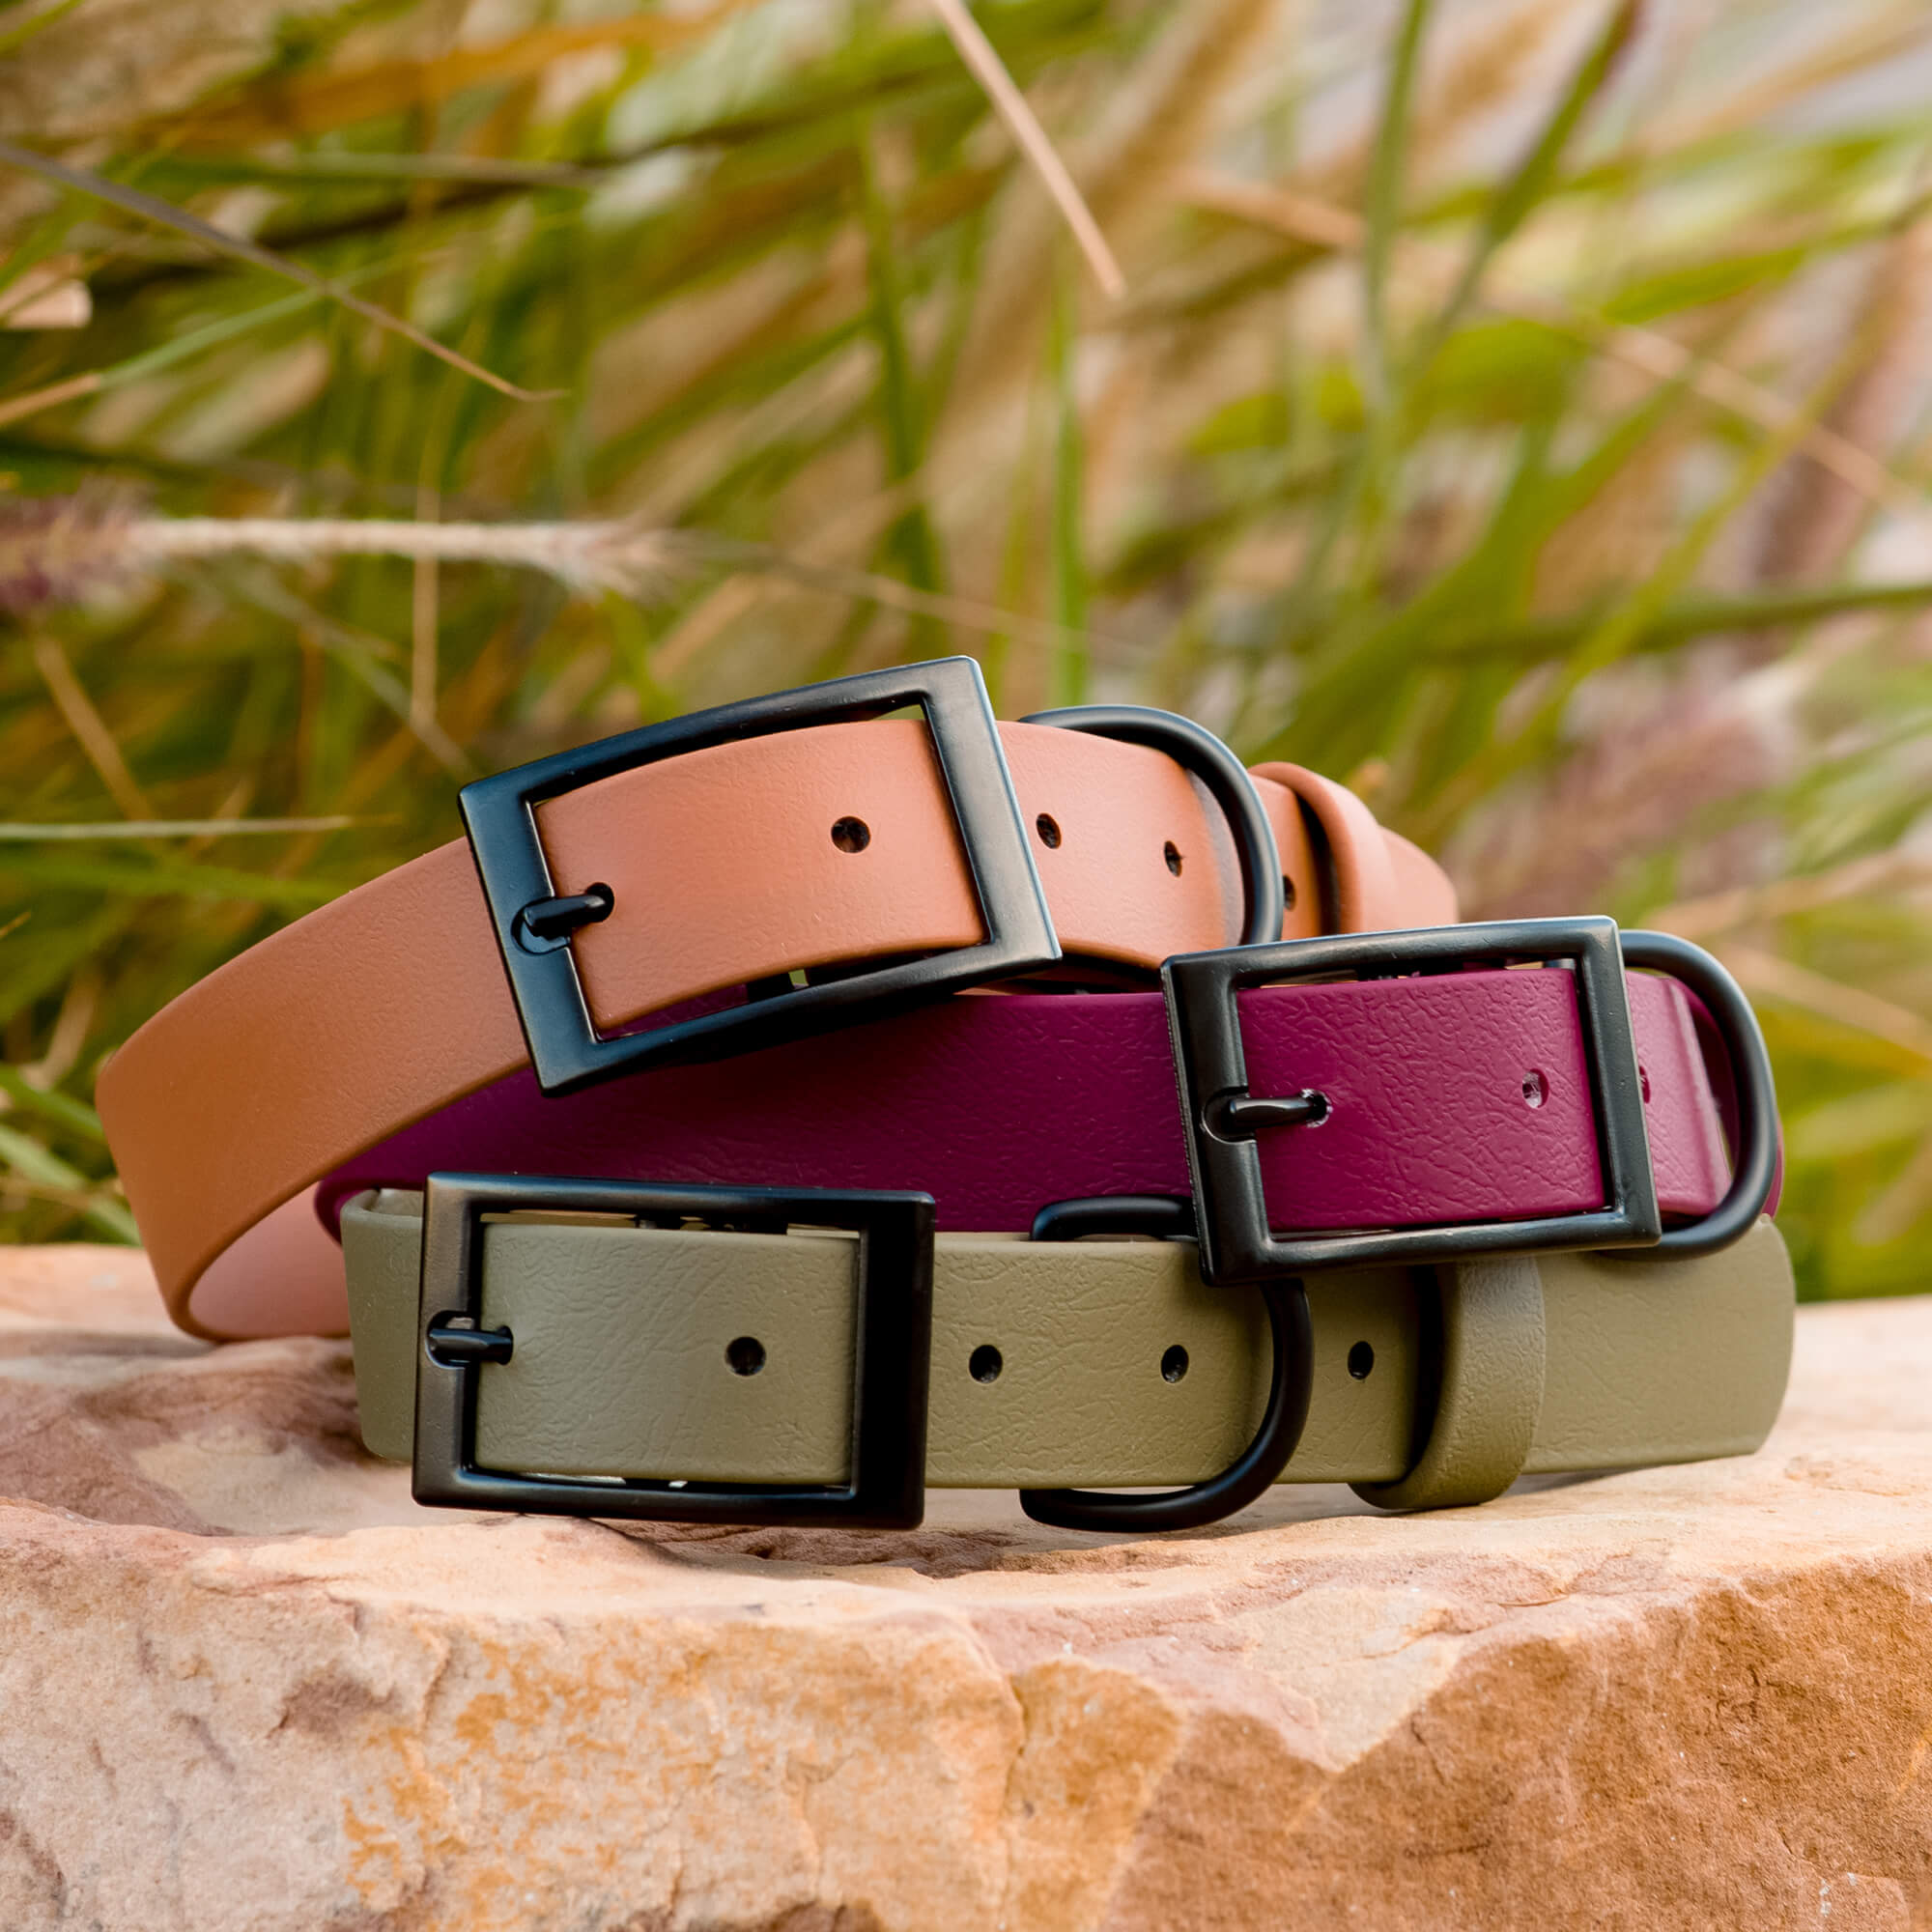 Stack of three BioThane collars with matte black buckles